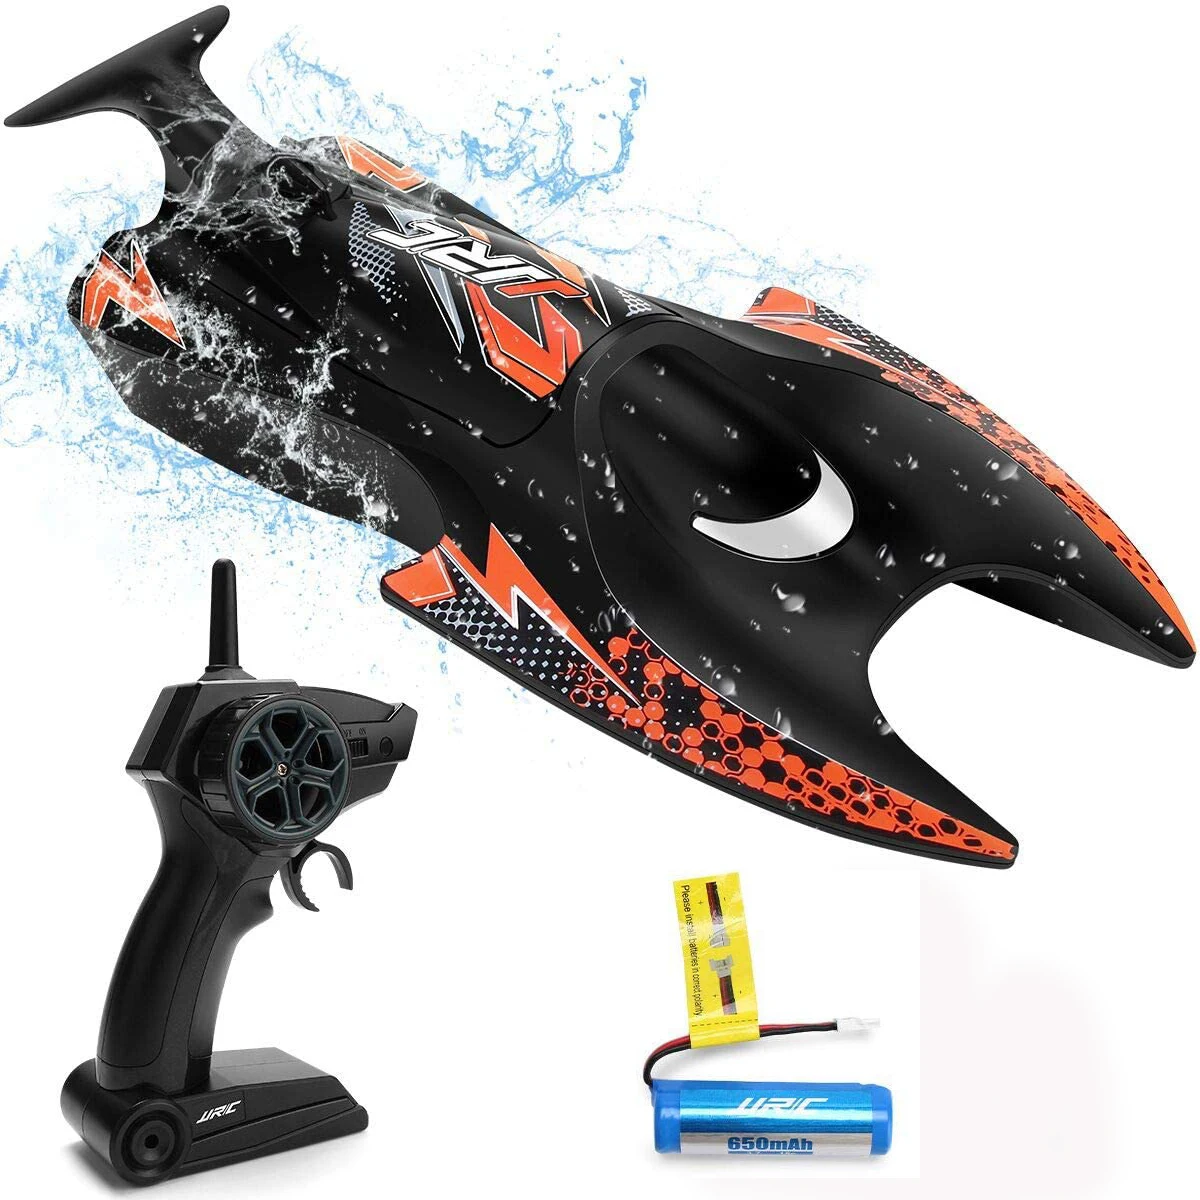 

JJRC 1/47 Scale High Speed RC Boat 2.4G Radio Controlled Boat Ship Remote Controlled Toy 4CH RC Racing Boat Gift For Boy Kids S6